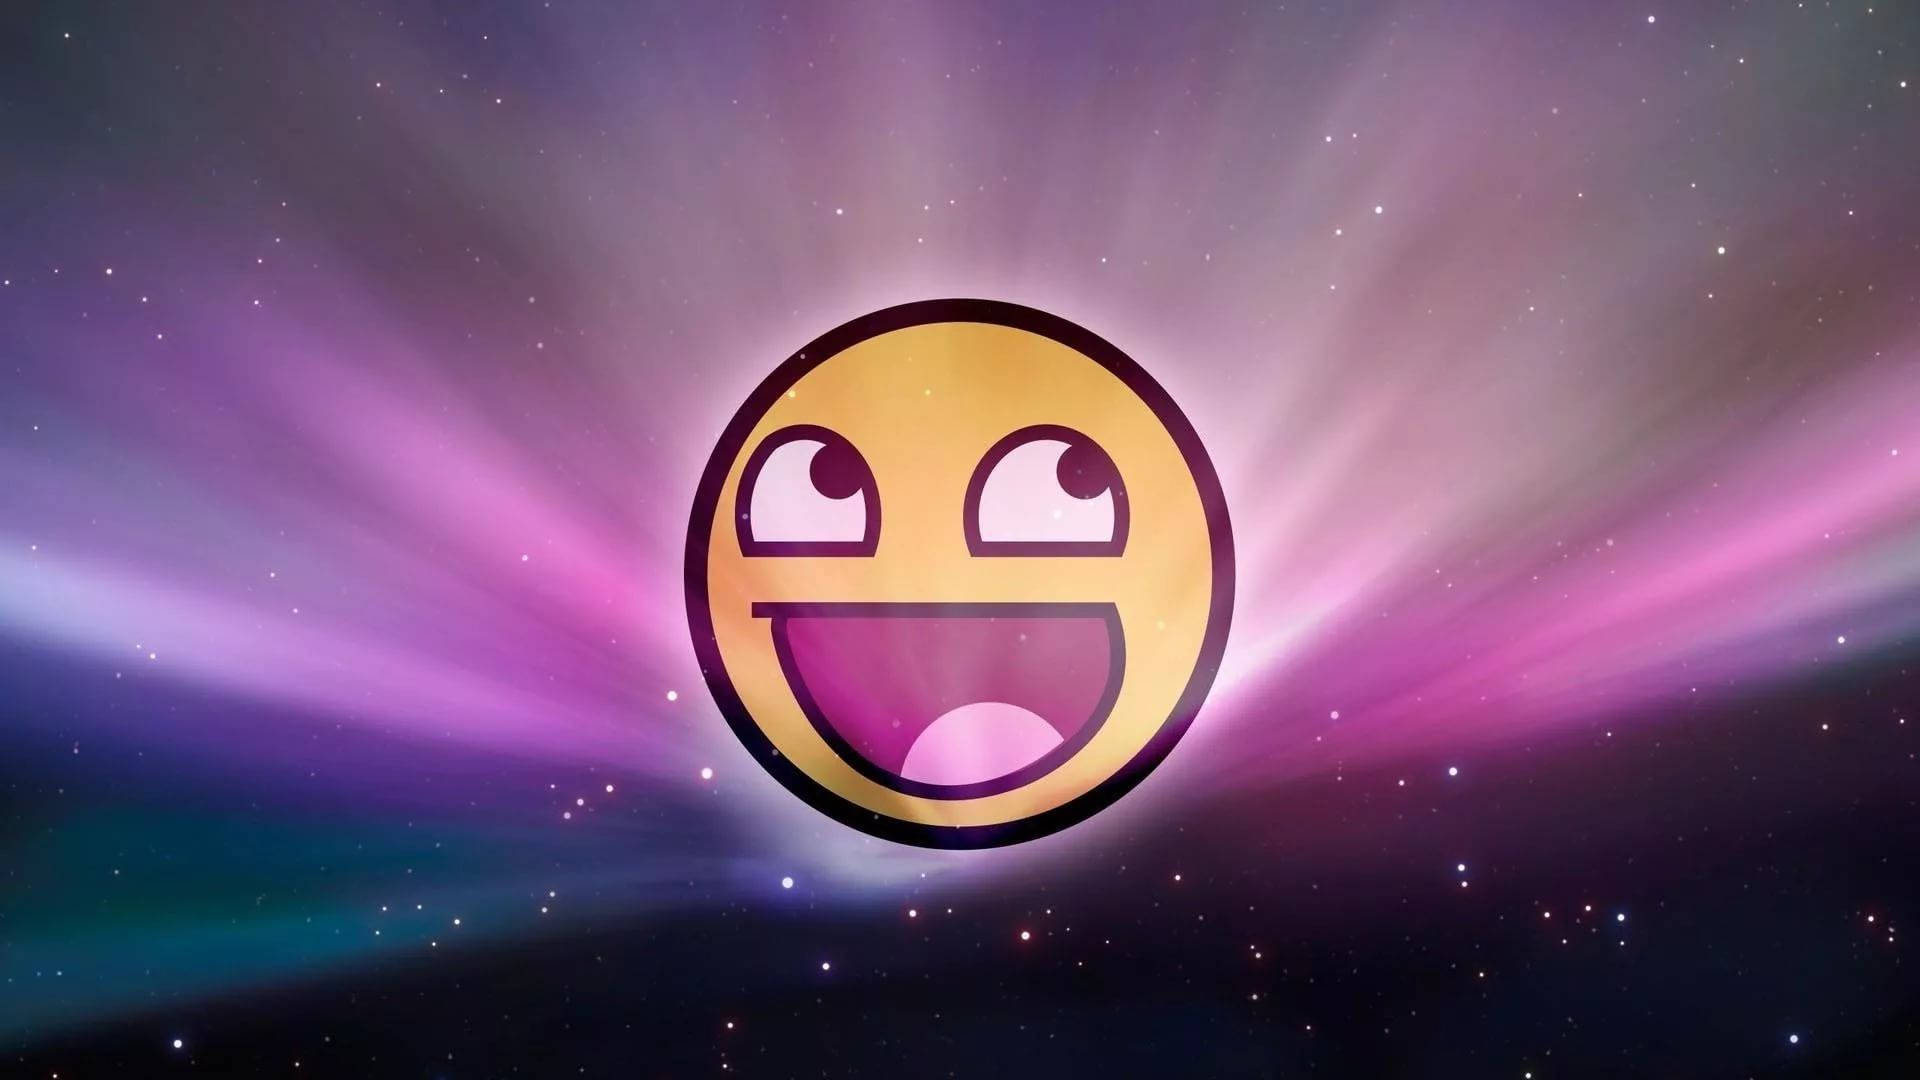 Download Epic Smiley Awesome Face Meme Wallpaper 